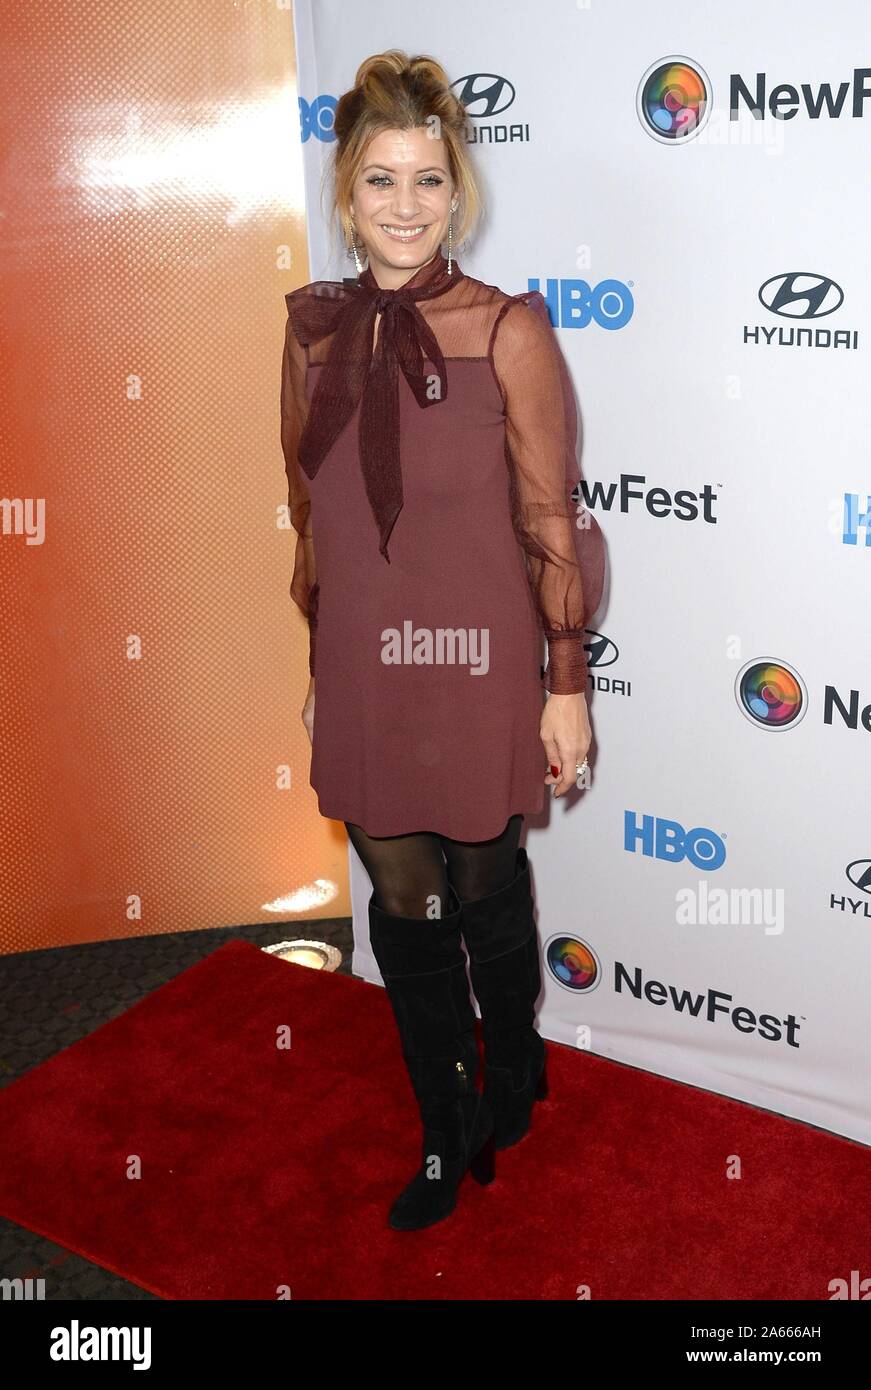 New York, NY, USA. 23rd Oct, 2019. Kate Walsh at arrivals for SELL BY Screening at NewFest 2019 Opening Night, SVA Theater, New York, NY October 23, 2019. Credit: Kristin Callahan/Everett Collection/Alamy Live News Stock Photo